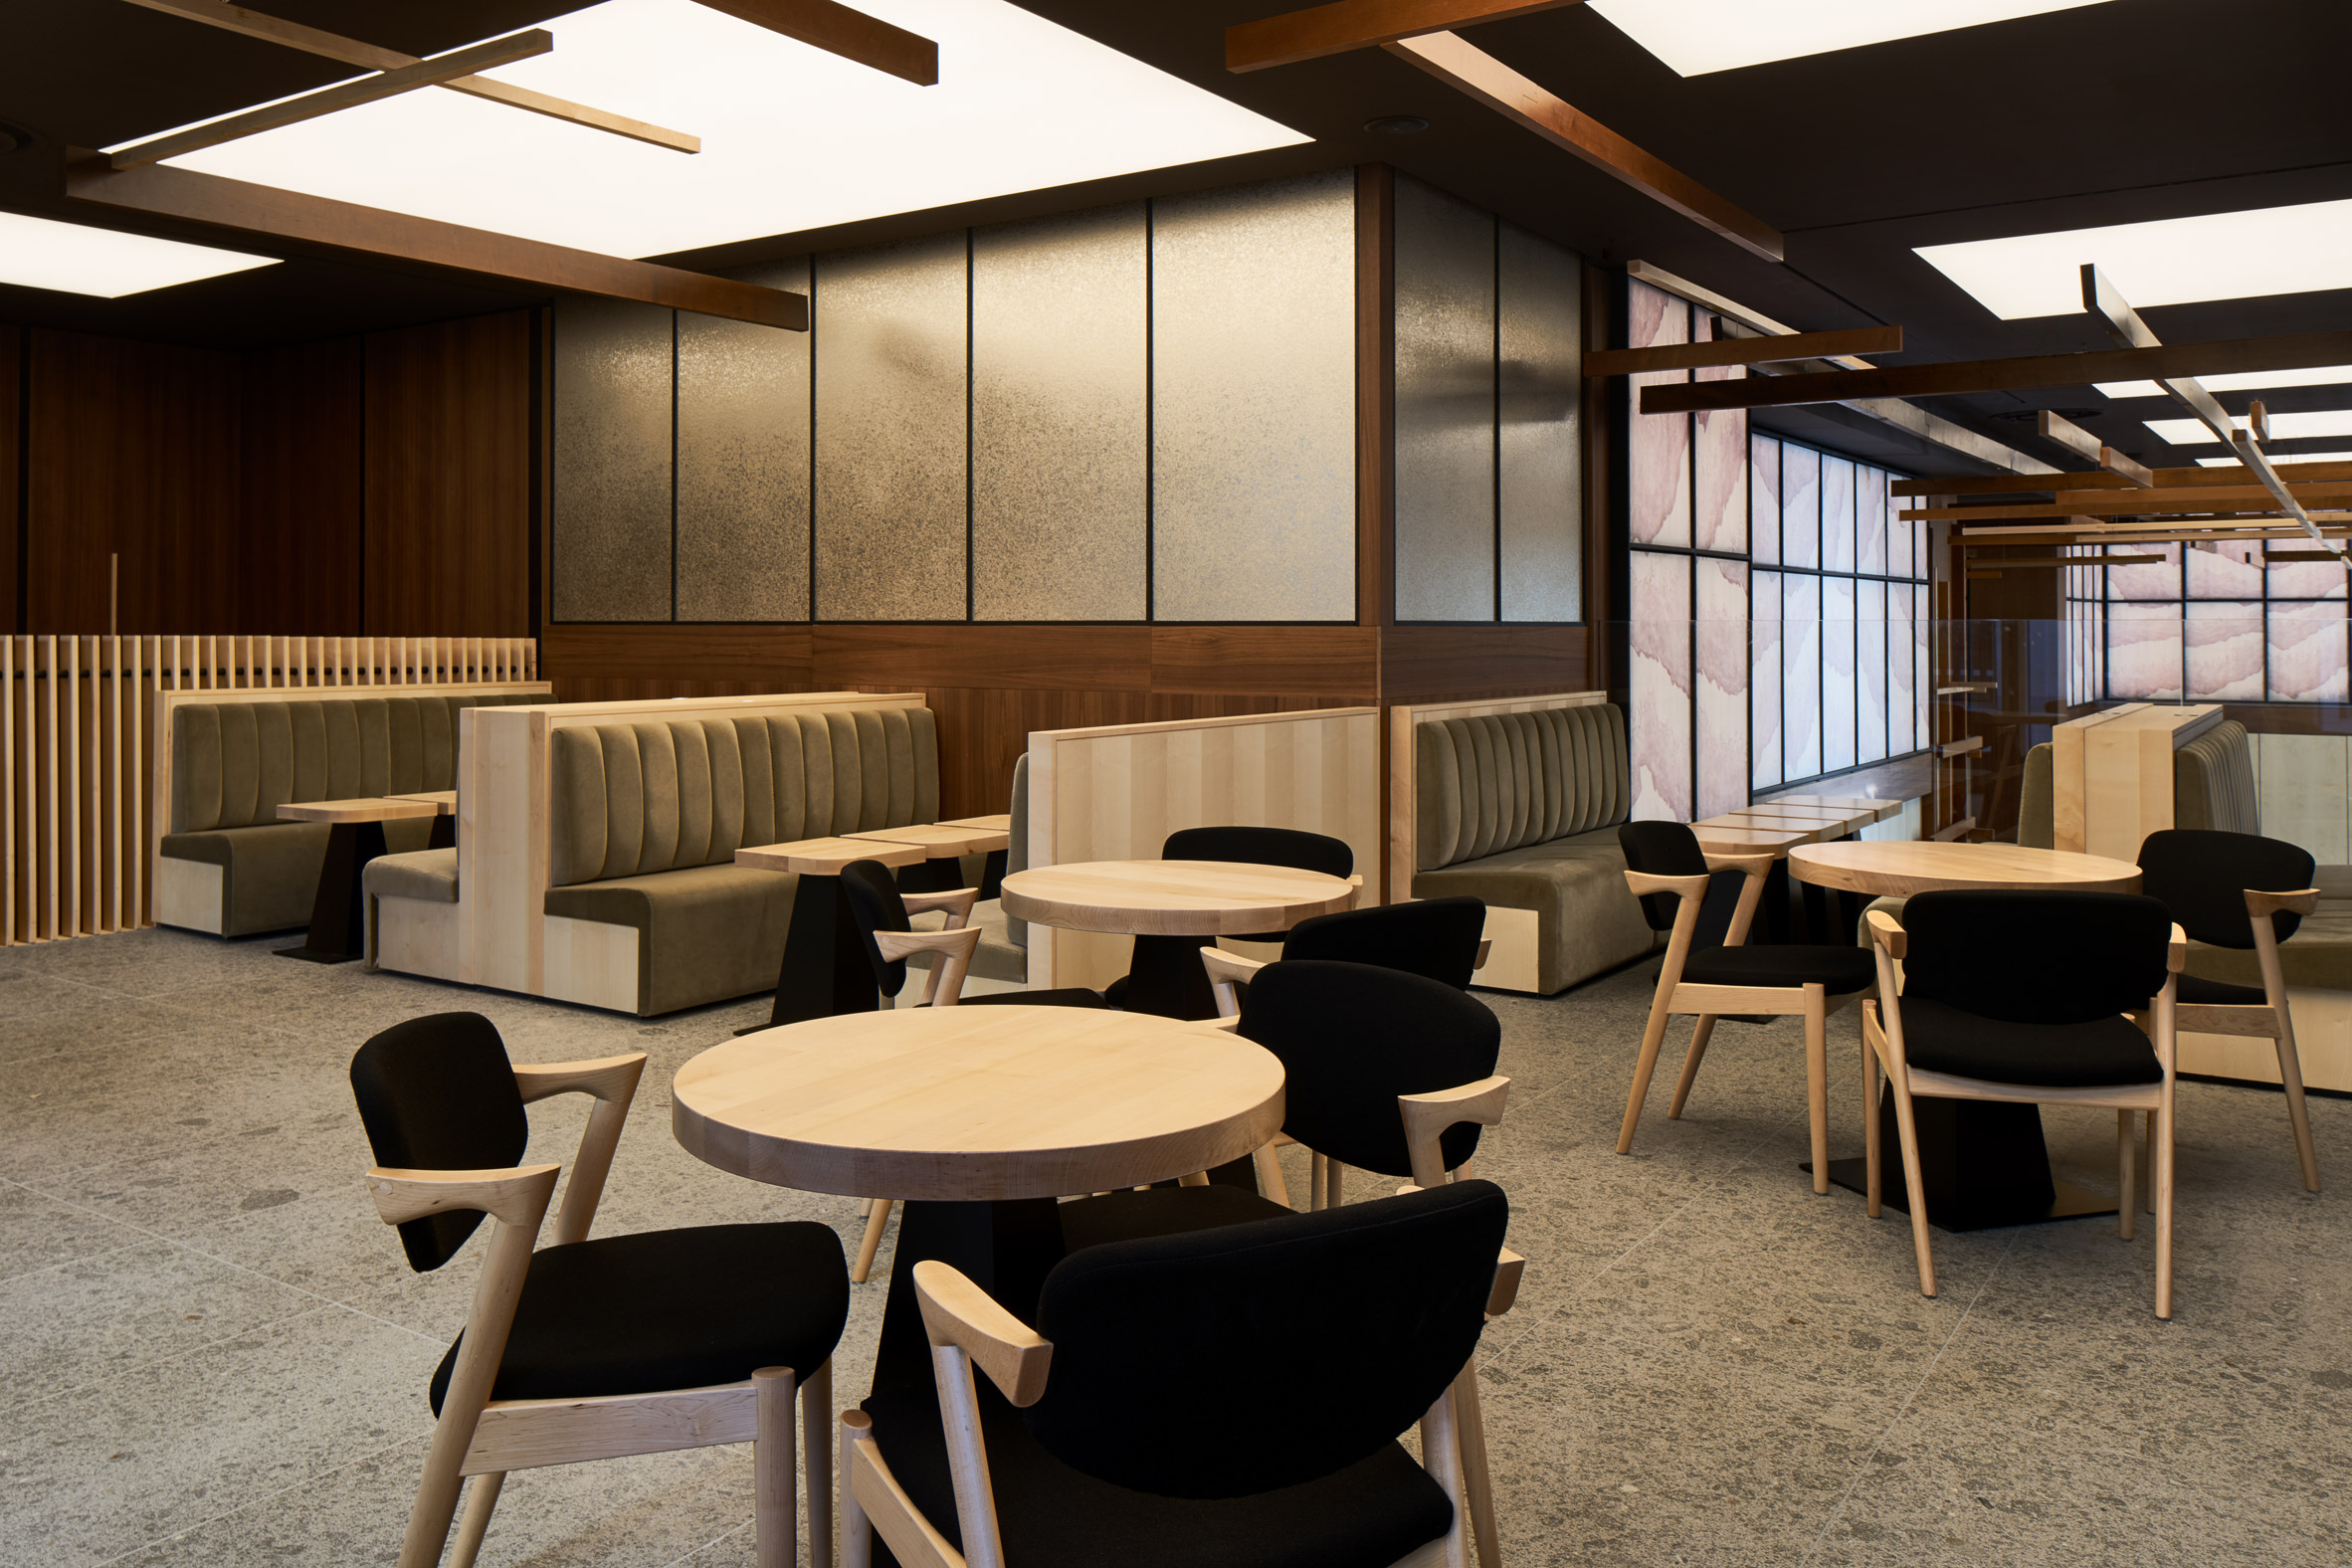 Sybarite bases Japanese restaurant interior on bamboo forests-7